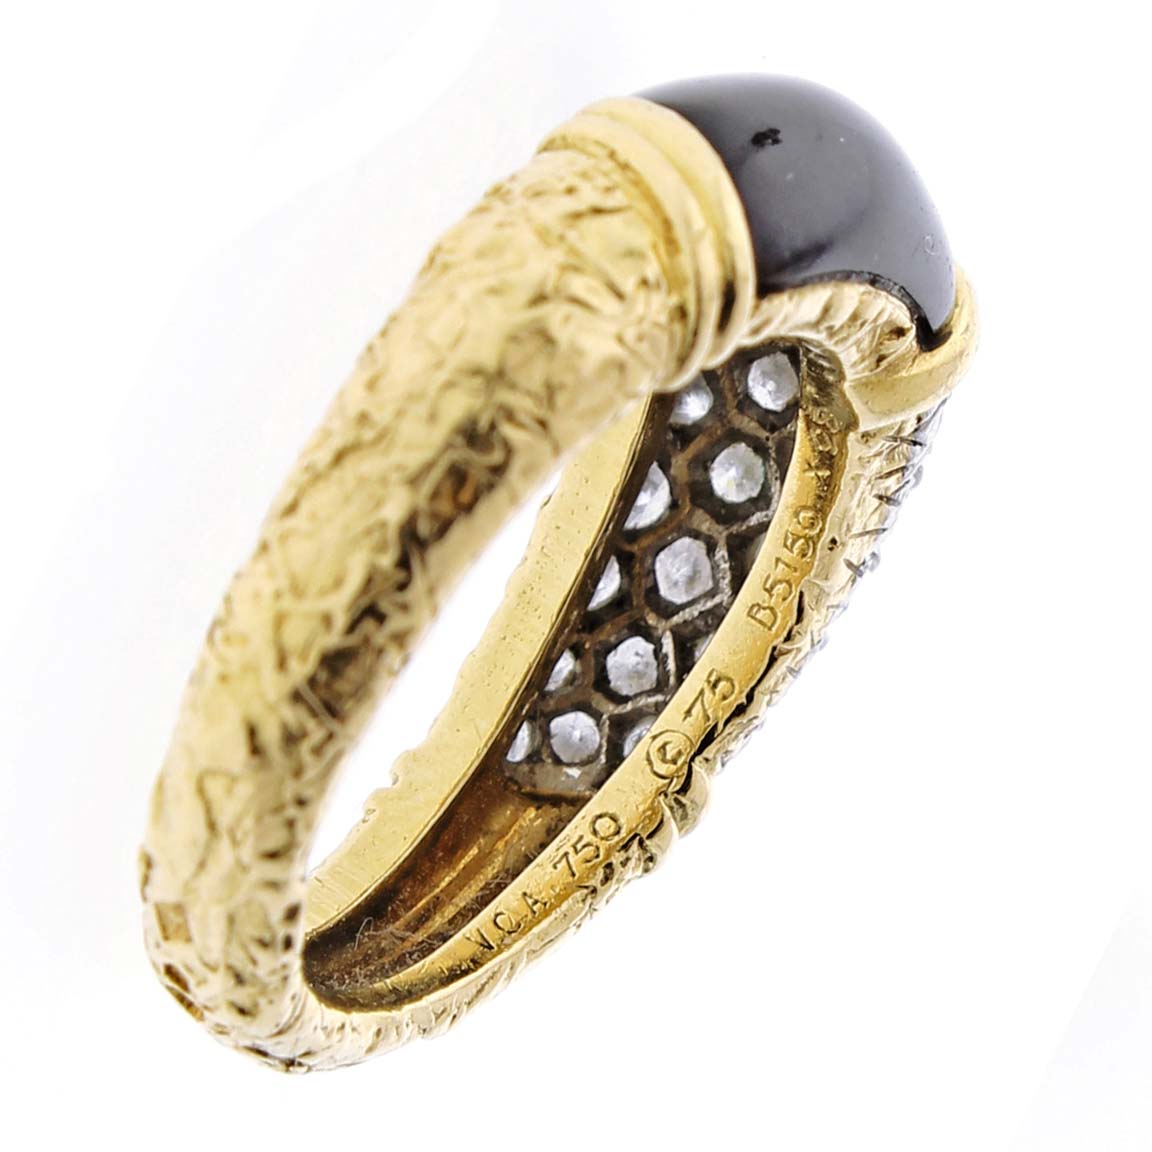 Van Cleef & Arpels Diamond and Onyx Ring | Pampillonia Jewelers ...